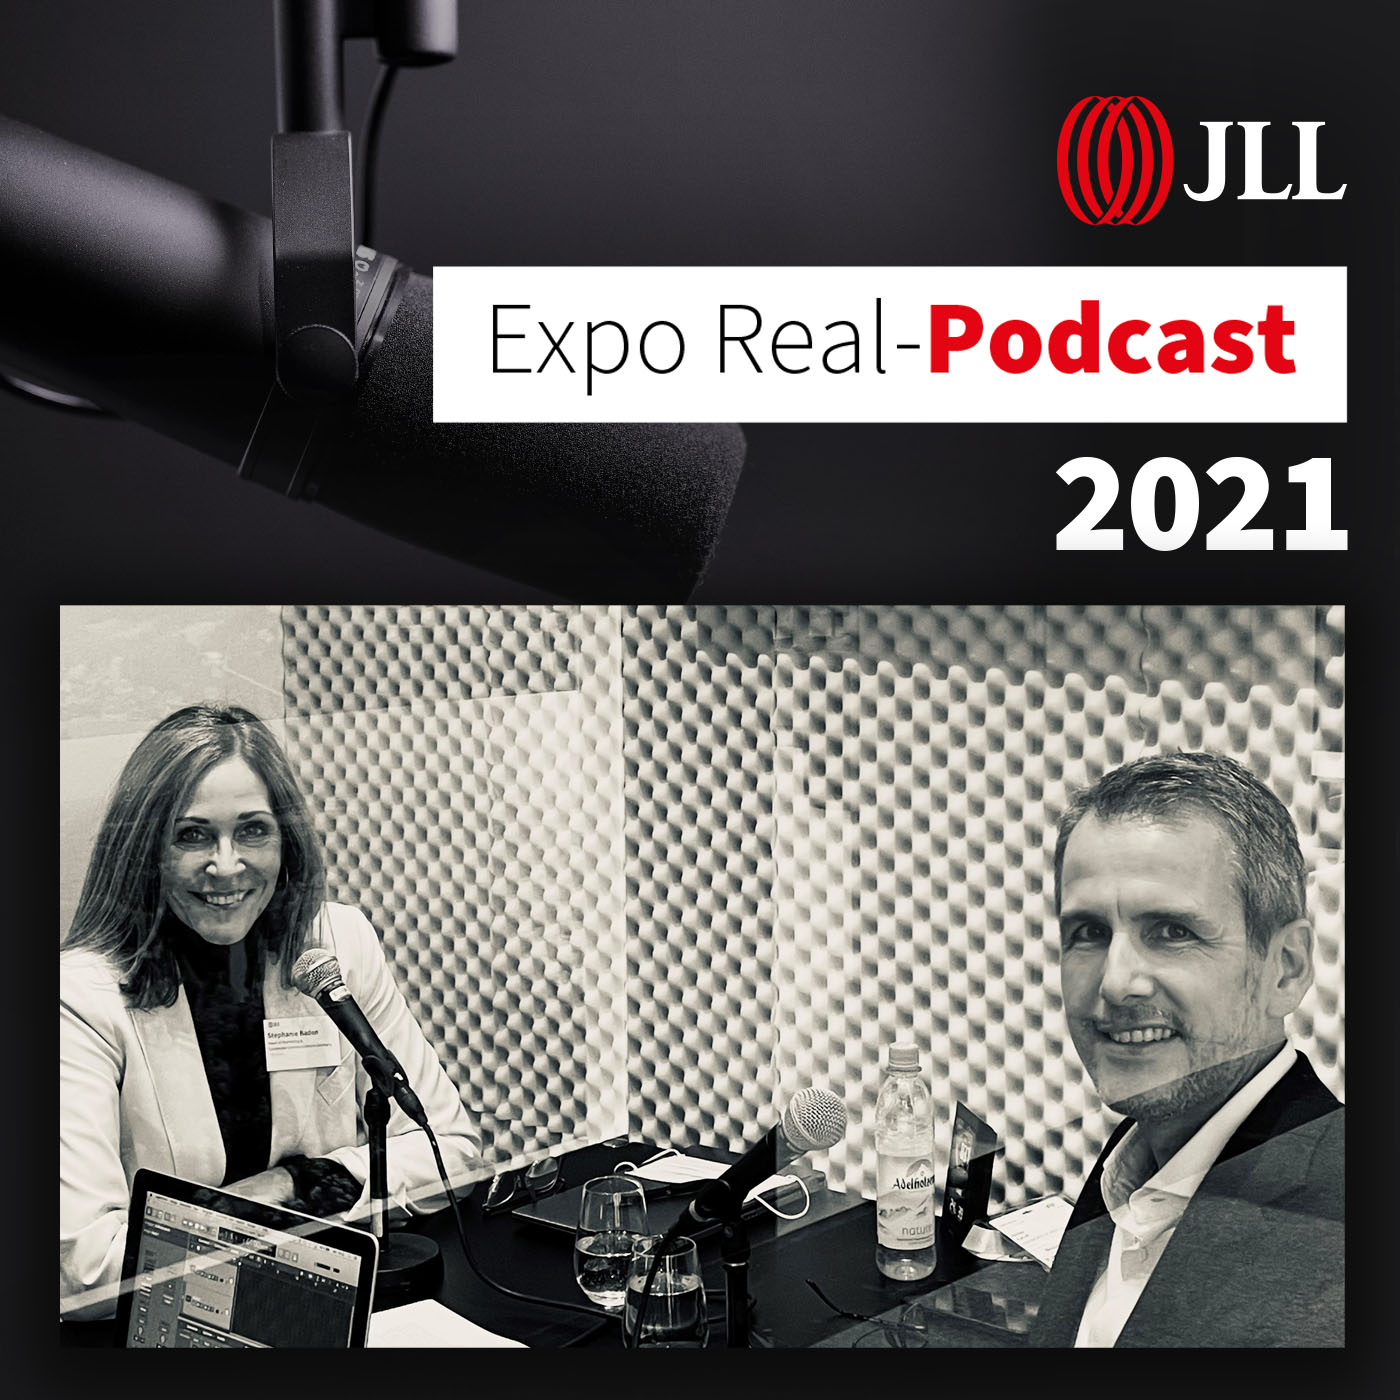 Artwork for podcast JLL Expo Real-Podcast 2021